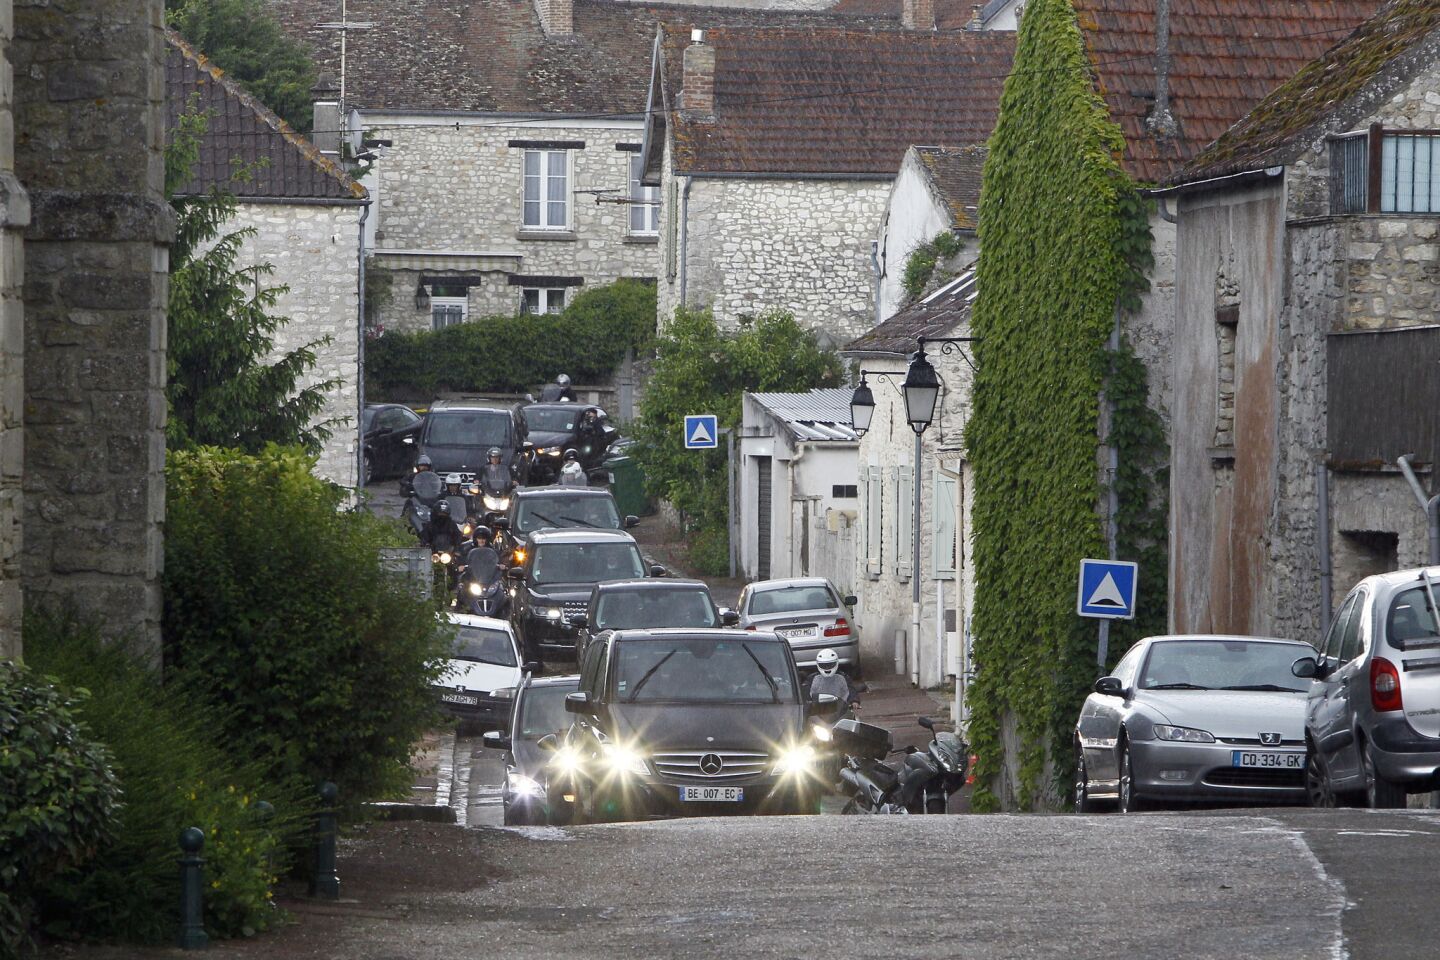 The cars of Kim Kardashian, Kanye West and their guests arrive at the entrance of the Chateau de Wideville in Davron, 35 miles west of Paris, for a pre-wedding brunch on May 23.